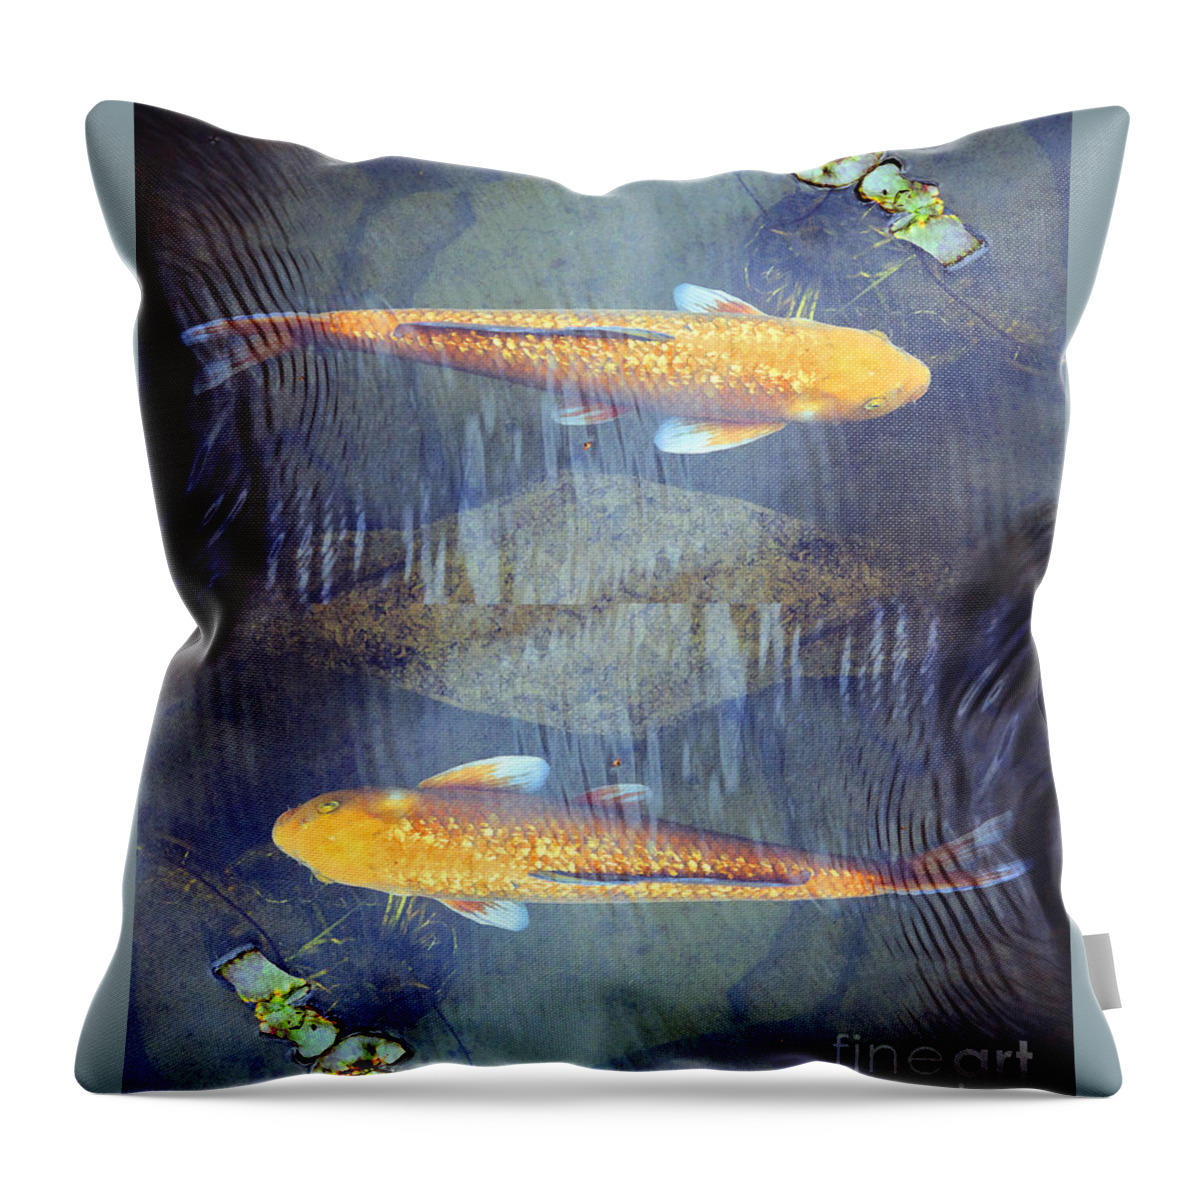 Koi Throw Pillow featuring the digital art Two Gold Fish 2 by Kristine Anderson